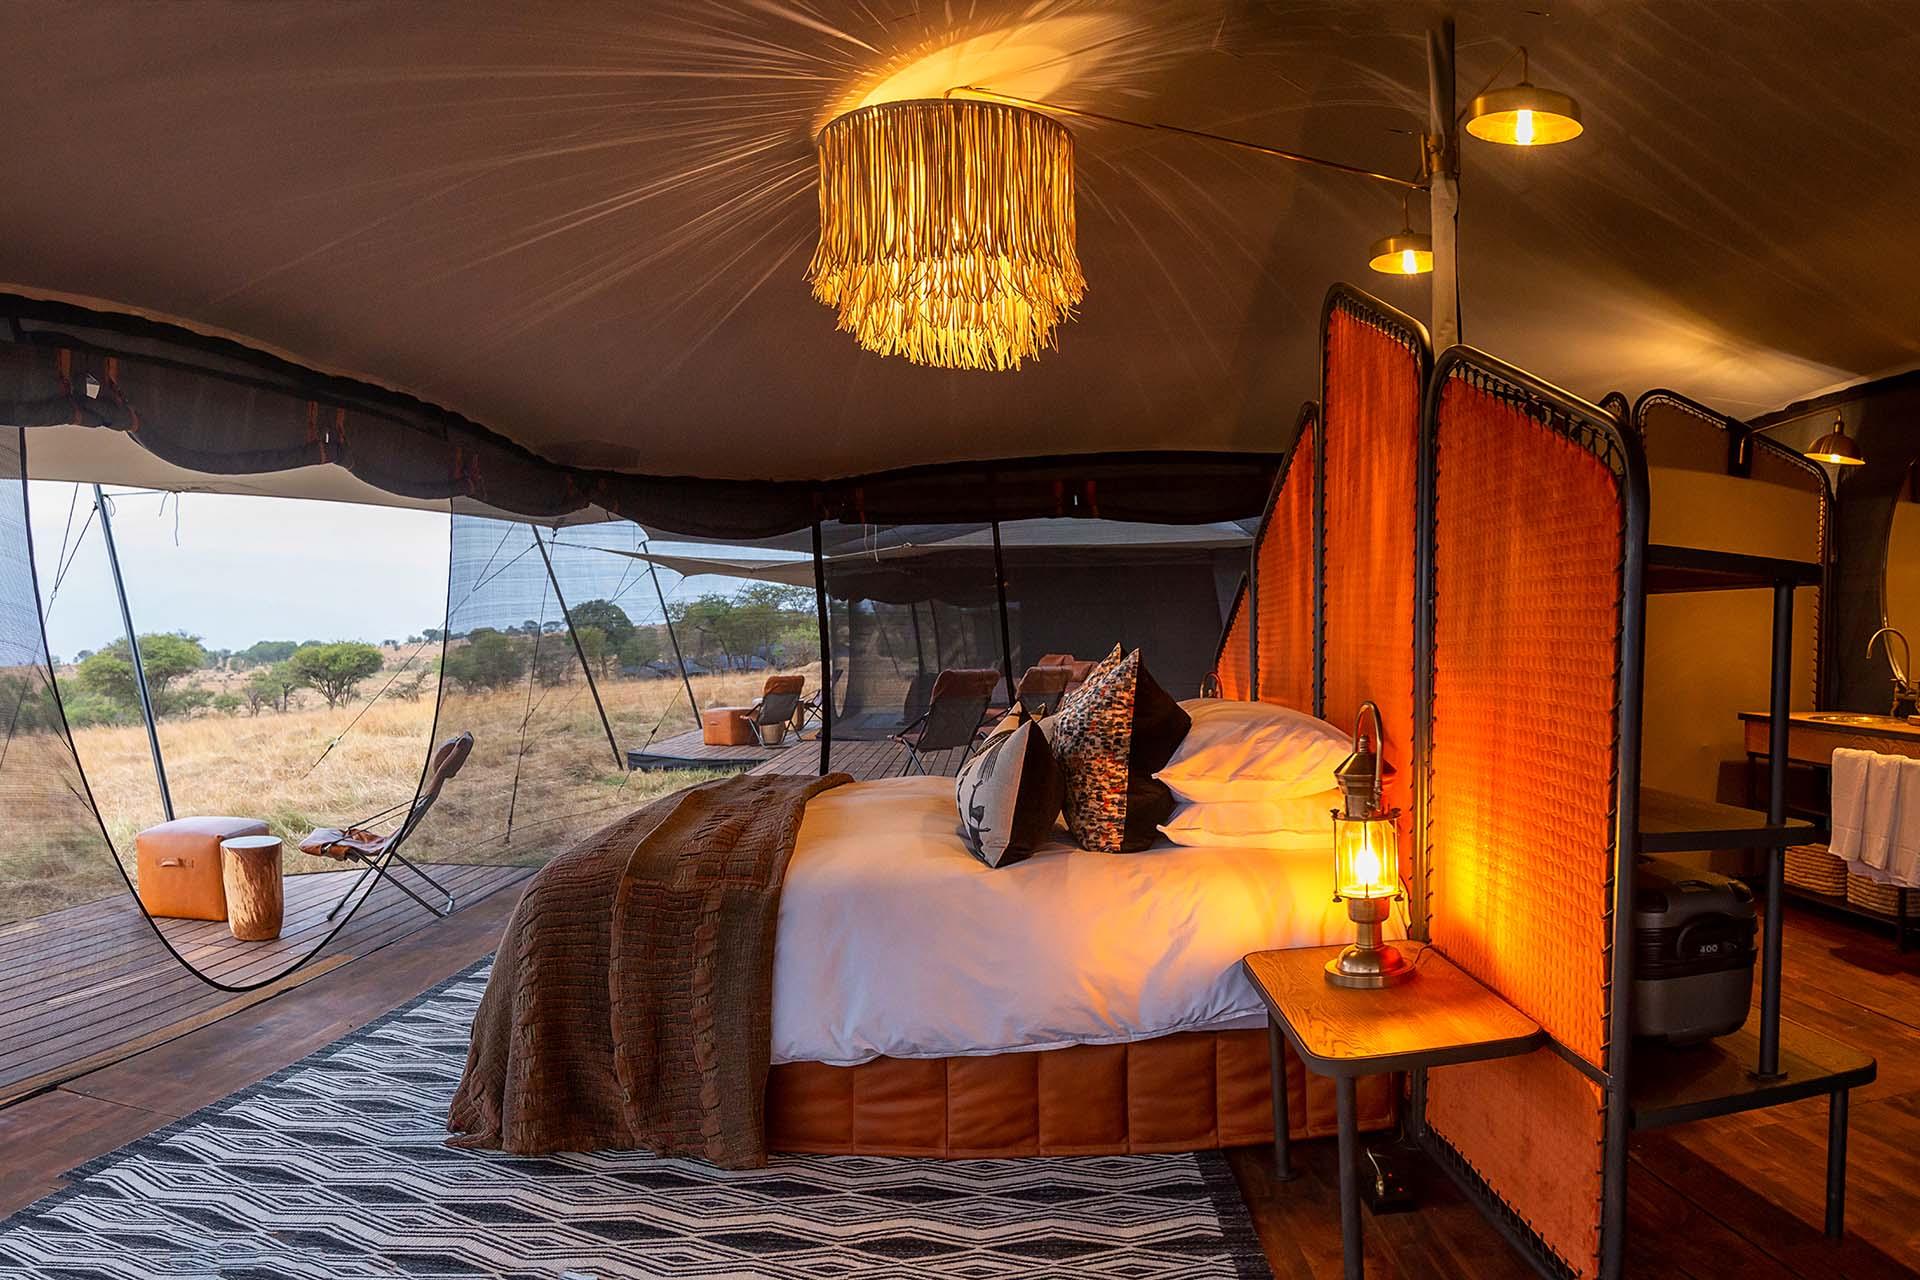 The Siringit Migration Camp has 8 luxury spacious canvas tents designed to bring you closer to the natural surroundings